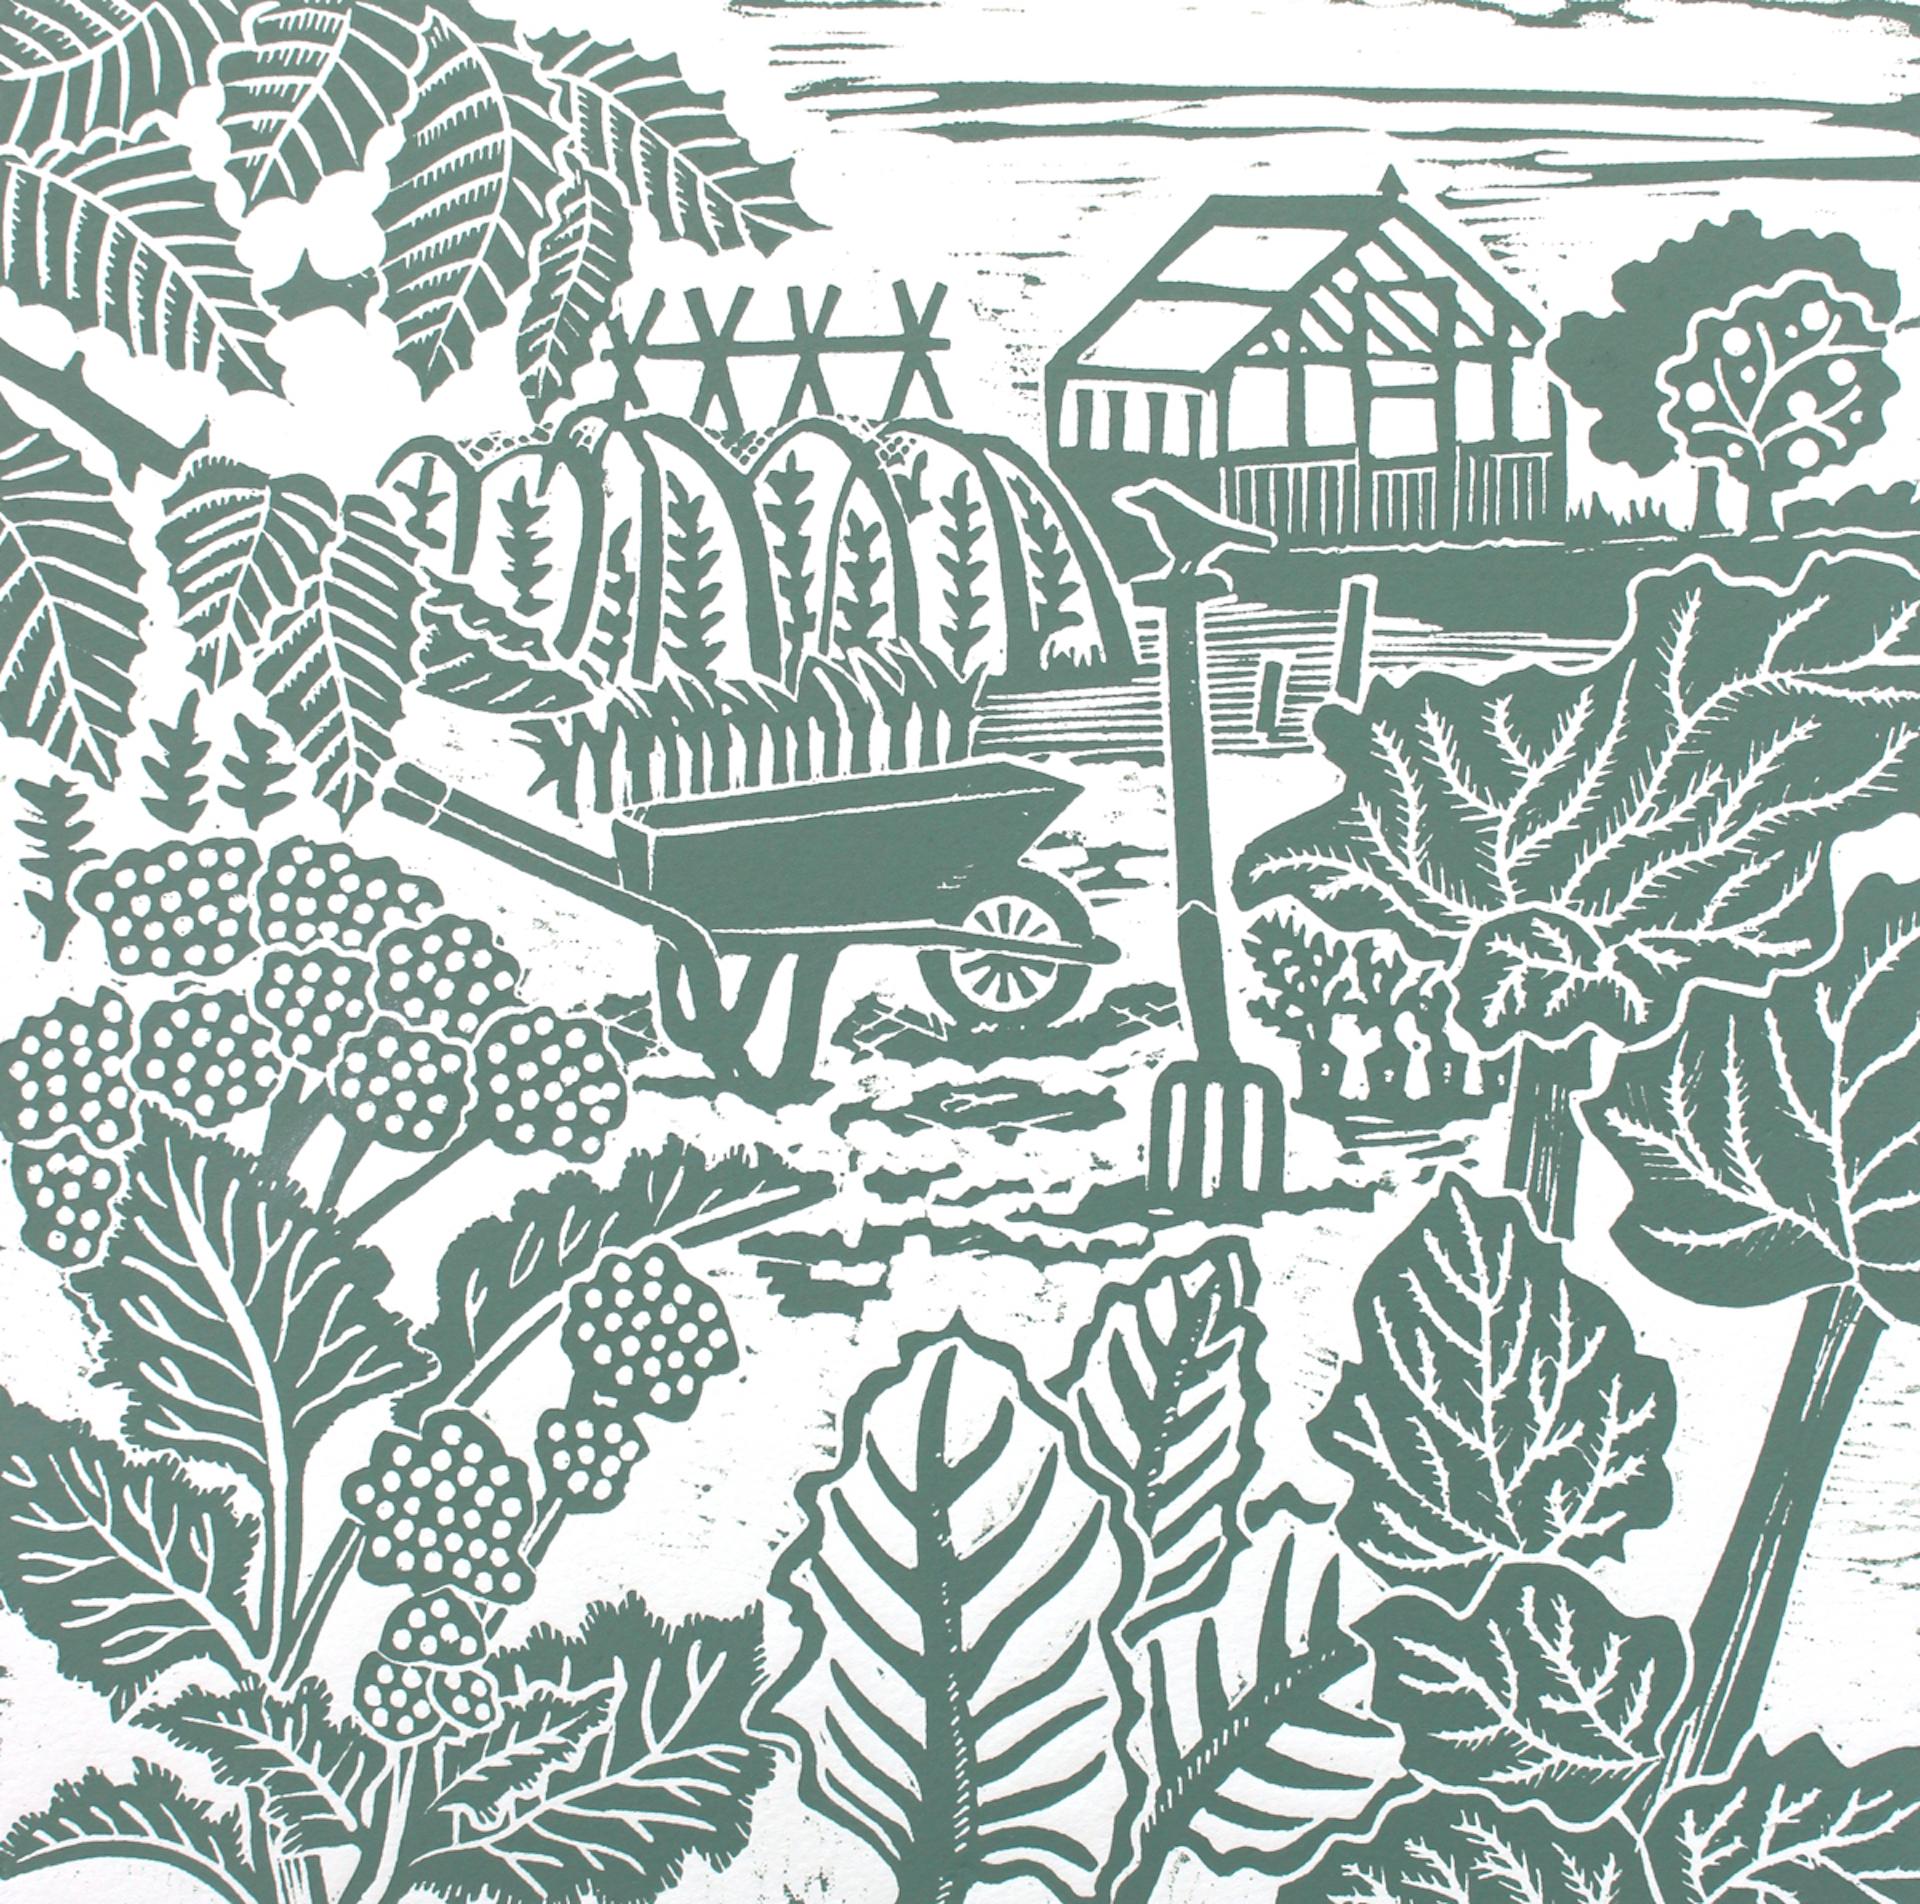 Kate Heiss
In the Allotment
Limited Edition Landscape Linocut Prit
Edition of 50
Image Size: H 30cm x W 30cm
Mounted Size: H 40cm x W 40cm x D 0.5cm
Oil based inks on 300GSM Soft white Somerset Velvet Paper
Signed and dated on the front
Sold